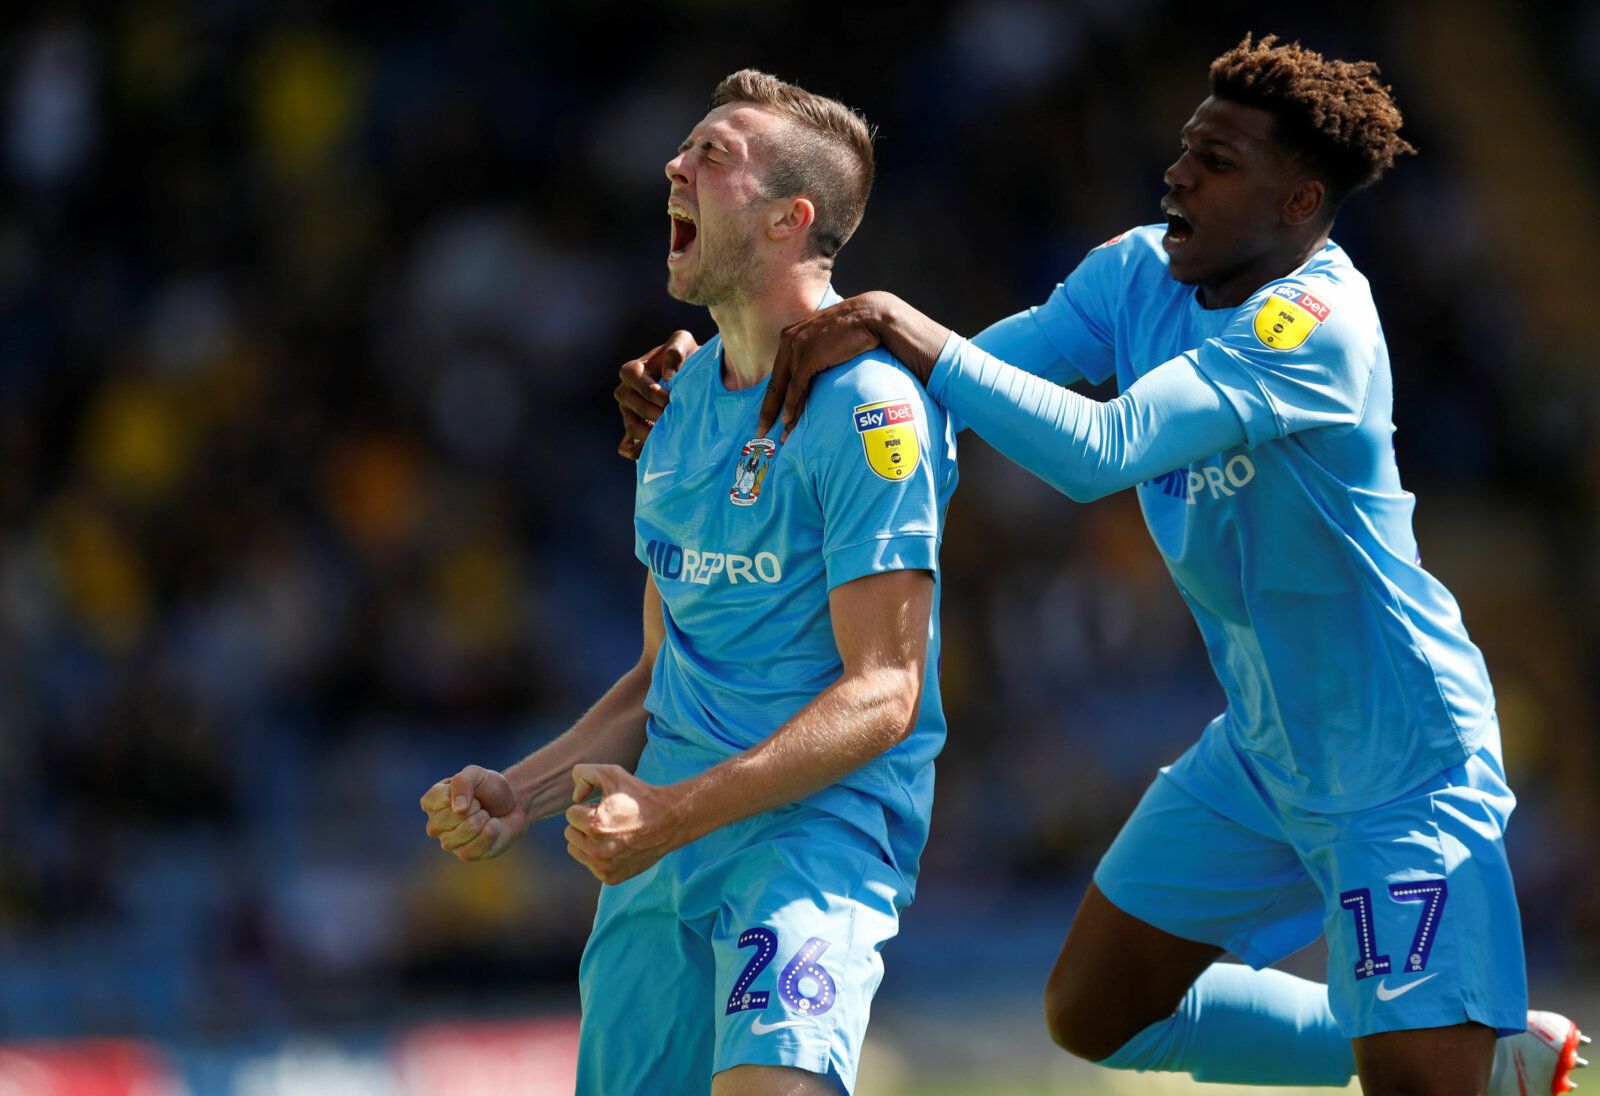 Soccer Football - League One - Oxford United v Coventry City - Kassam Stadium, Oxford, Britain - September 9, 2018   Coventry's Jordan Shipley celebrates scoring their first goal with Dujon Sterling    Action Images/Andrew Boyers    EDITORIAL USE ONLY. No use with unauthorized audio, video, data, fixture lists, club/league logos or 